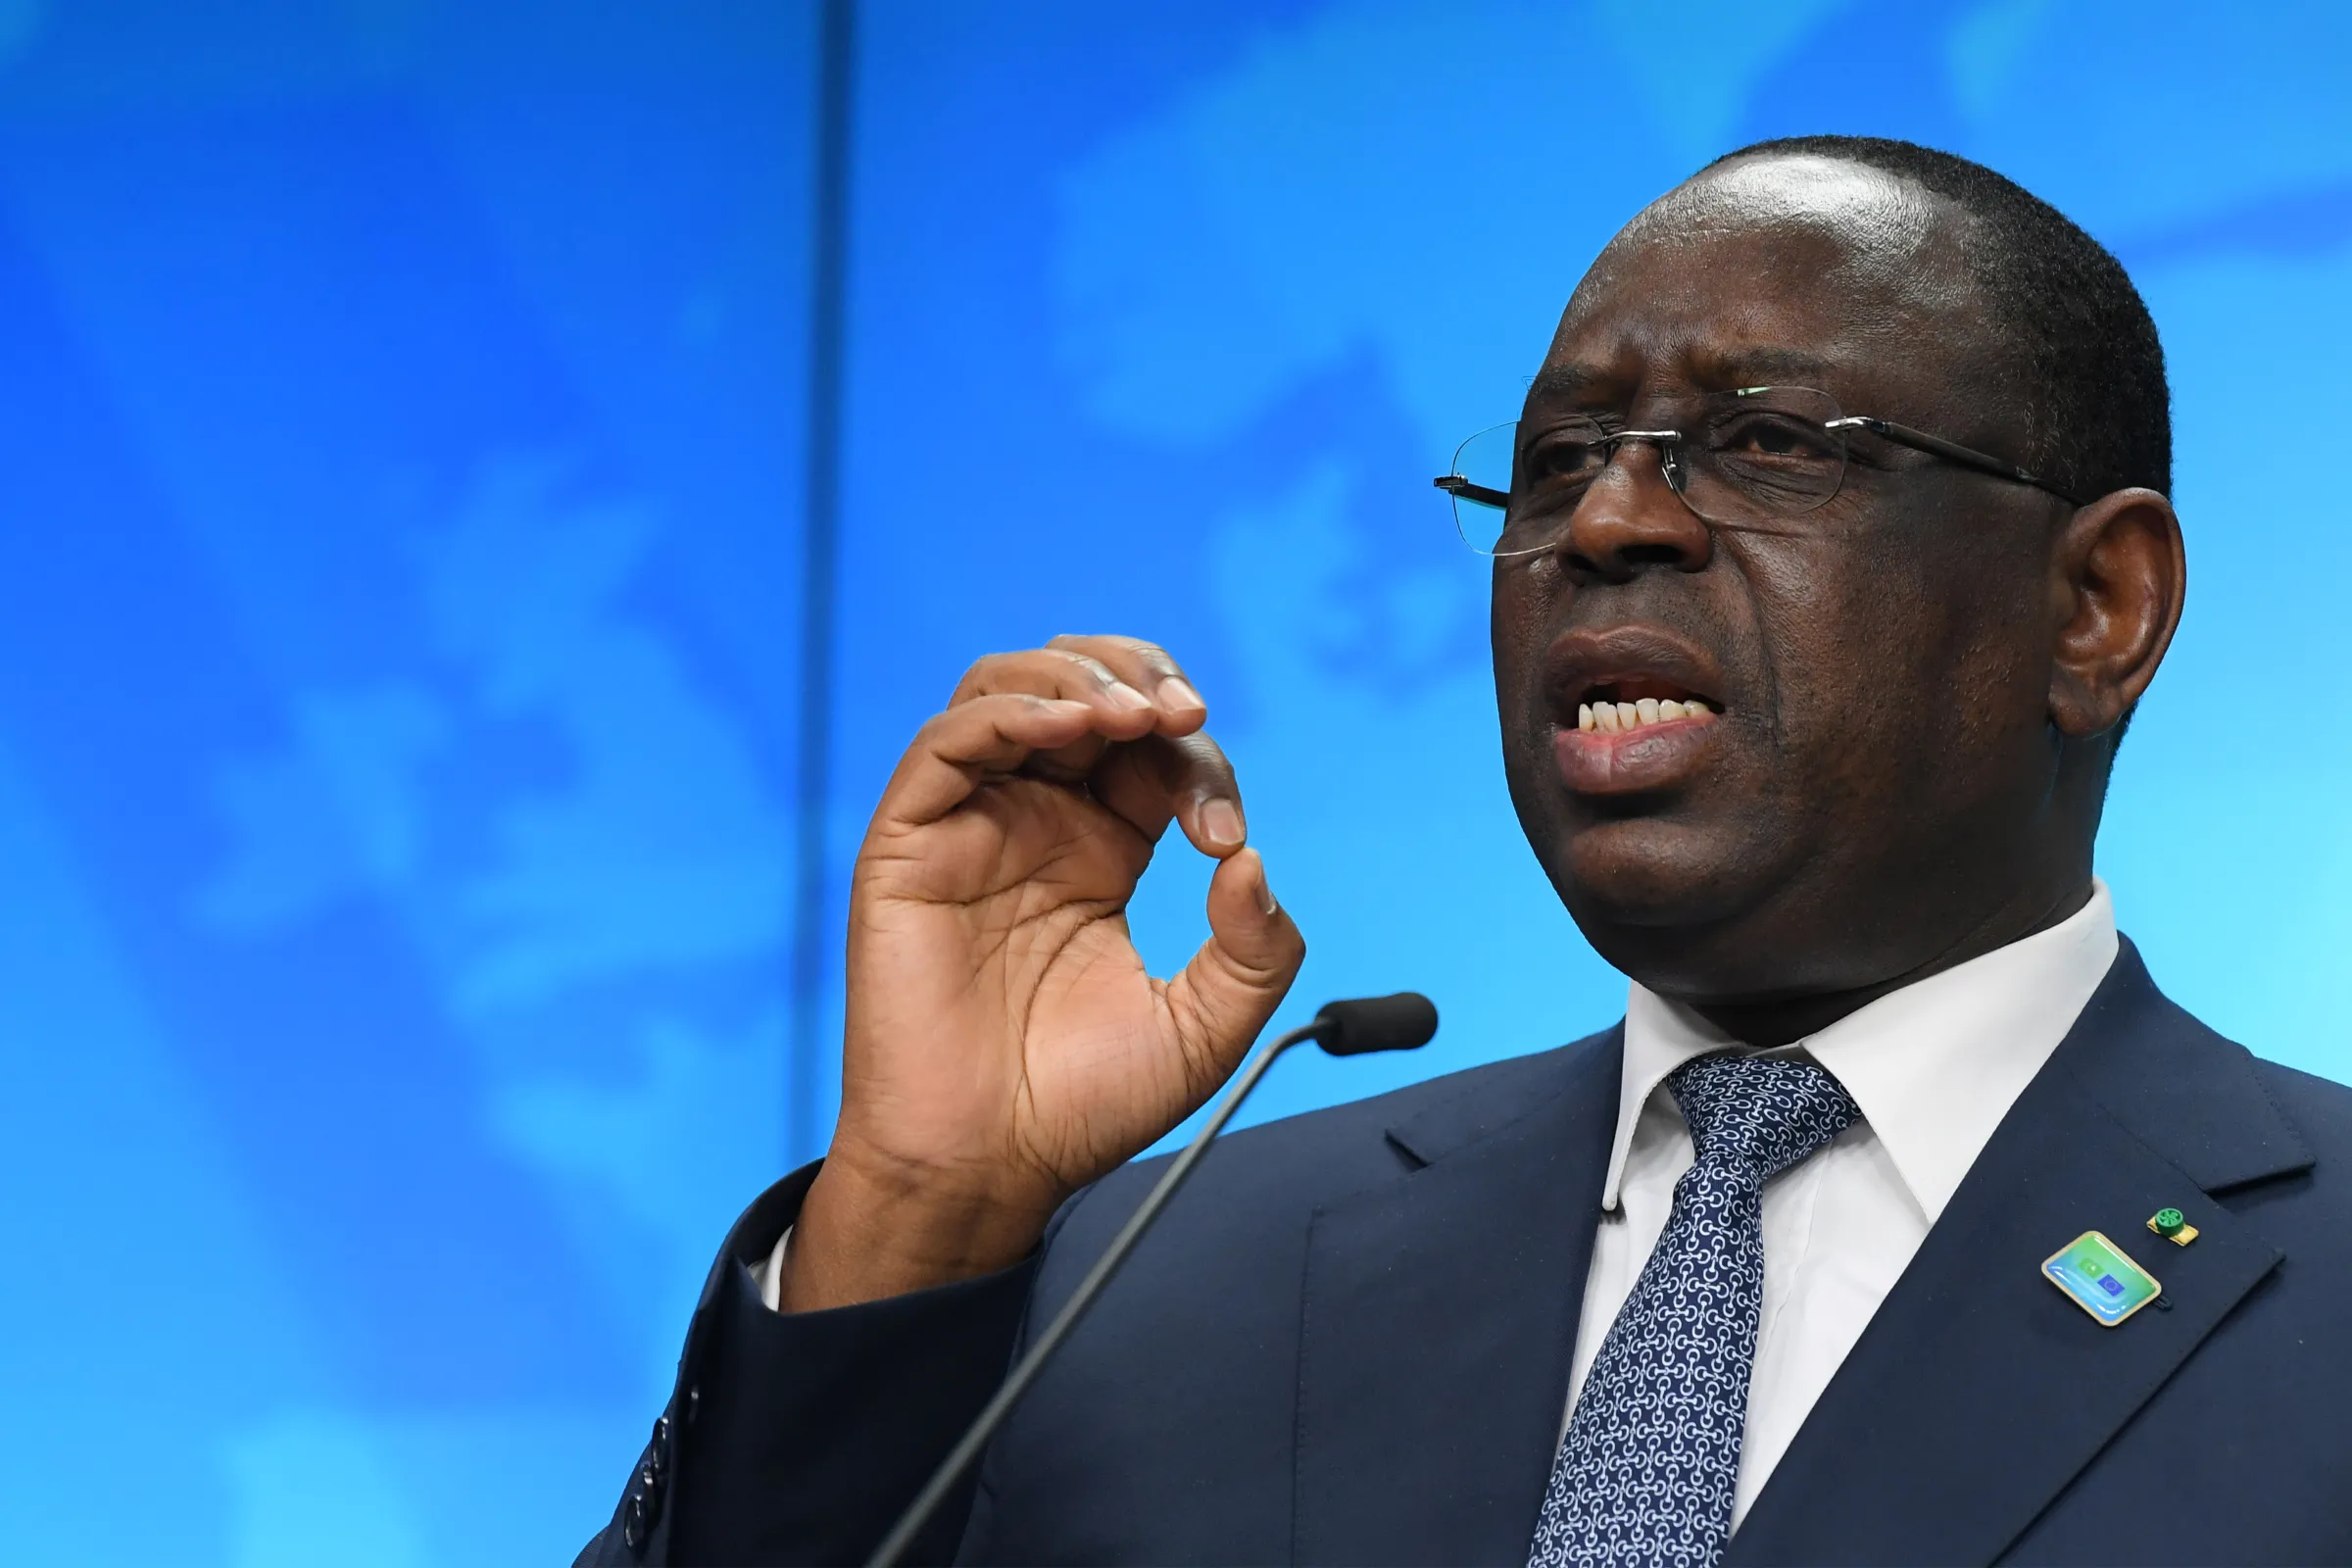 Senegal's President Macky Sall speaks at a news conference on the second day of a European Union (EU) African Union (AU) summit at The European Council Building in Brussels, Belgium February 18, 2022. John Thys/Pool via REUTERS